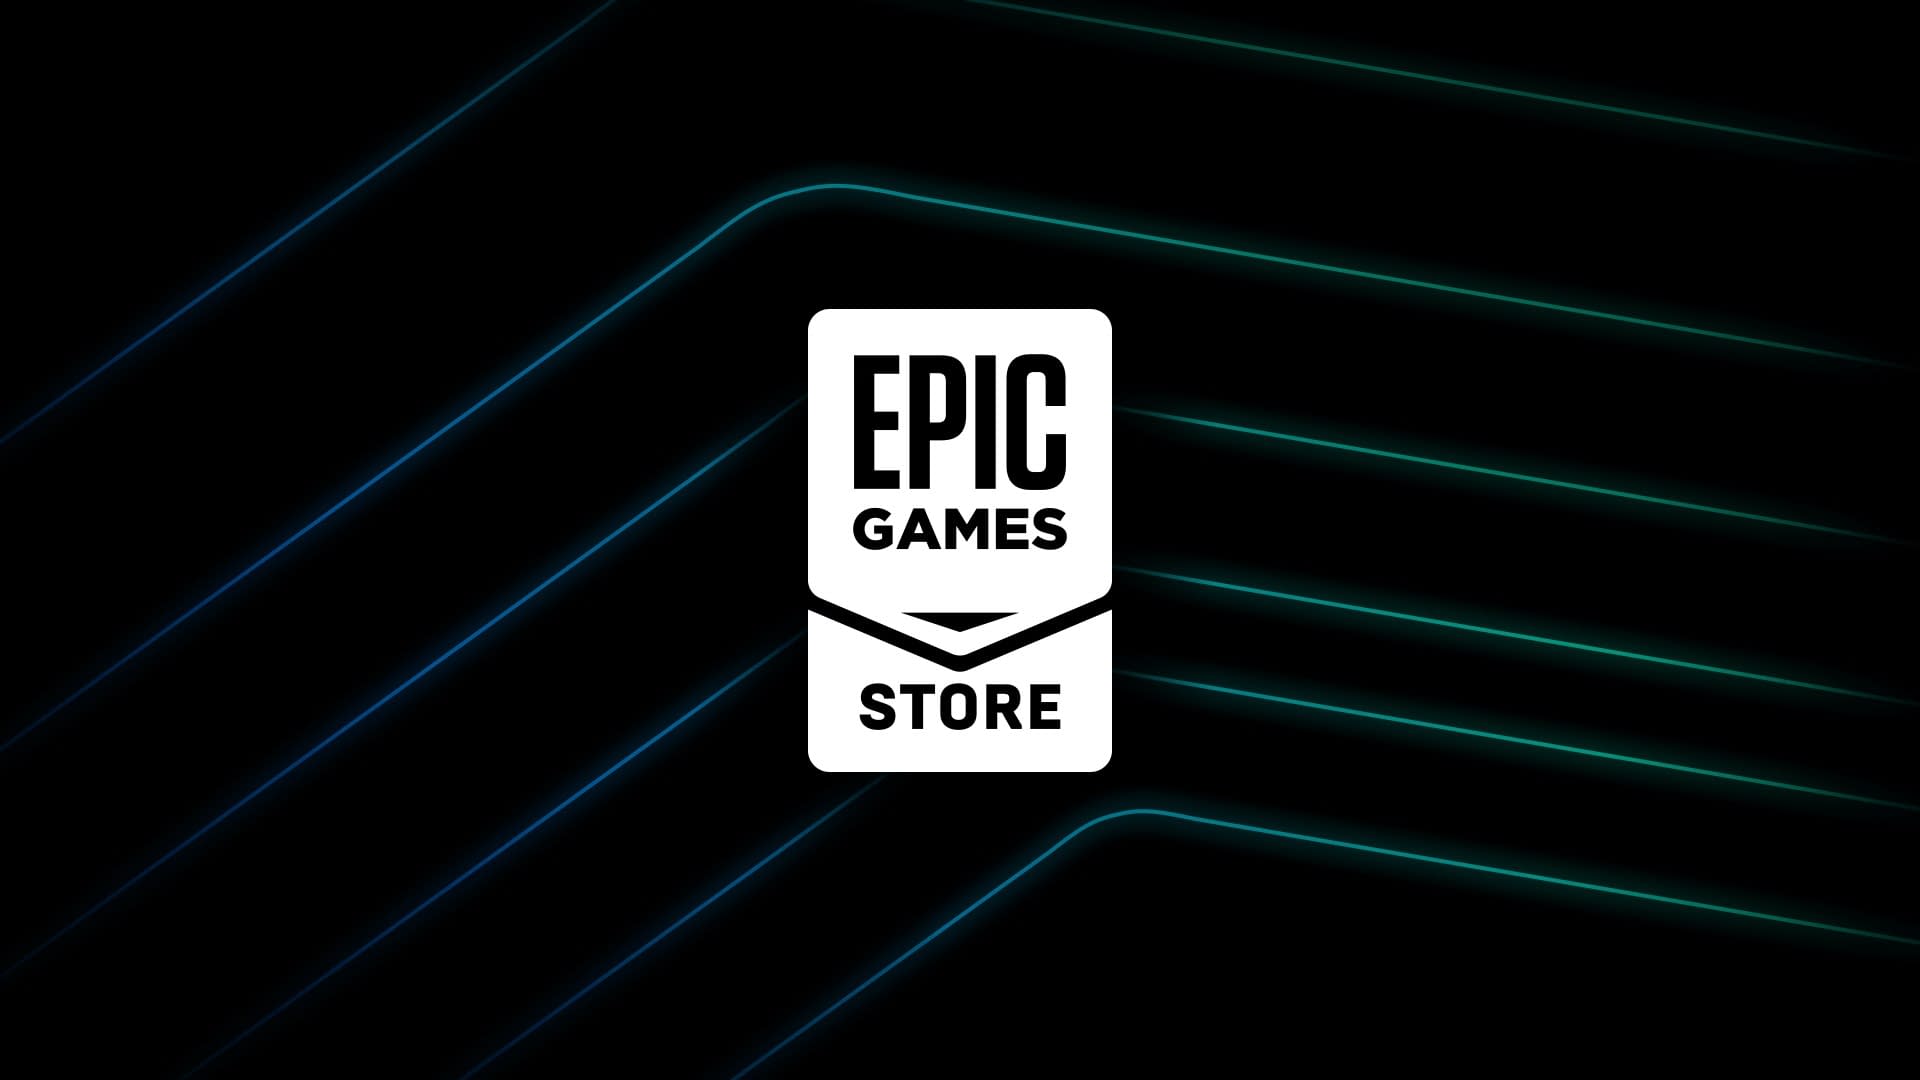 Epic Games 358 Tl’s Two Games Free!